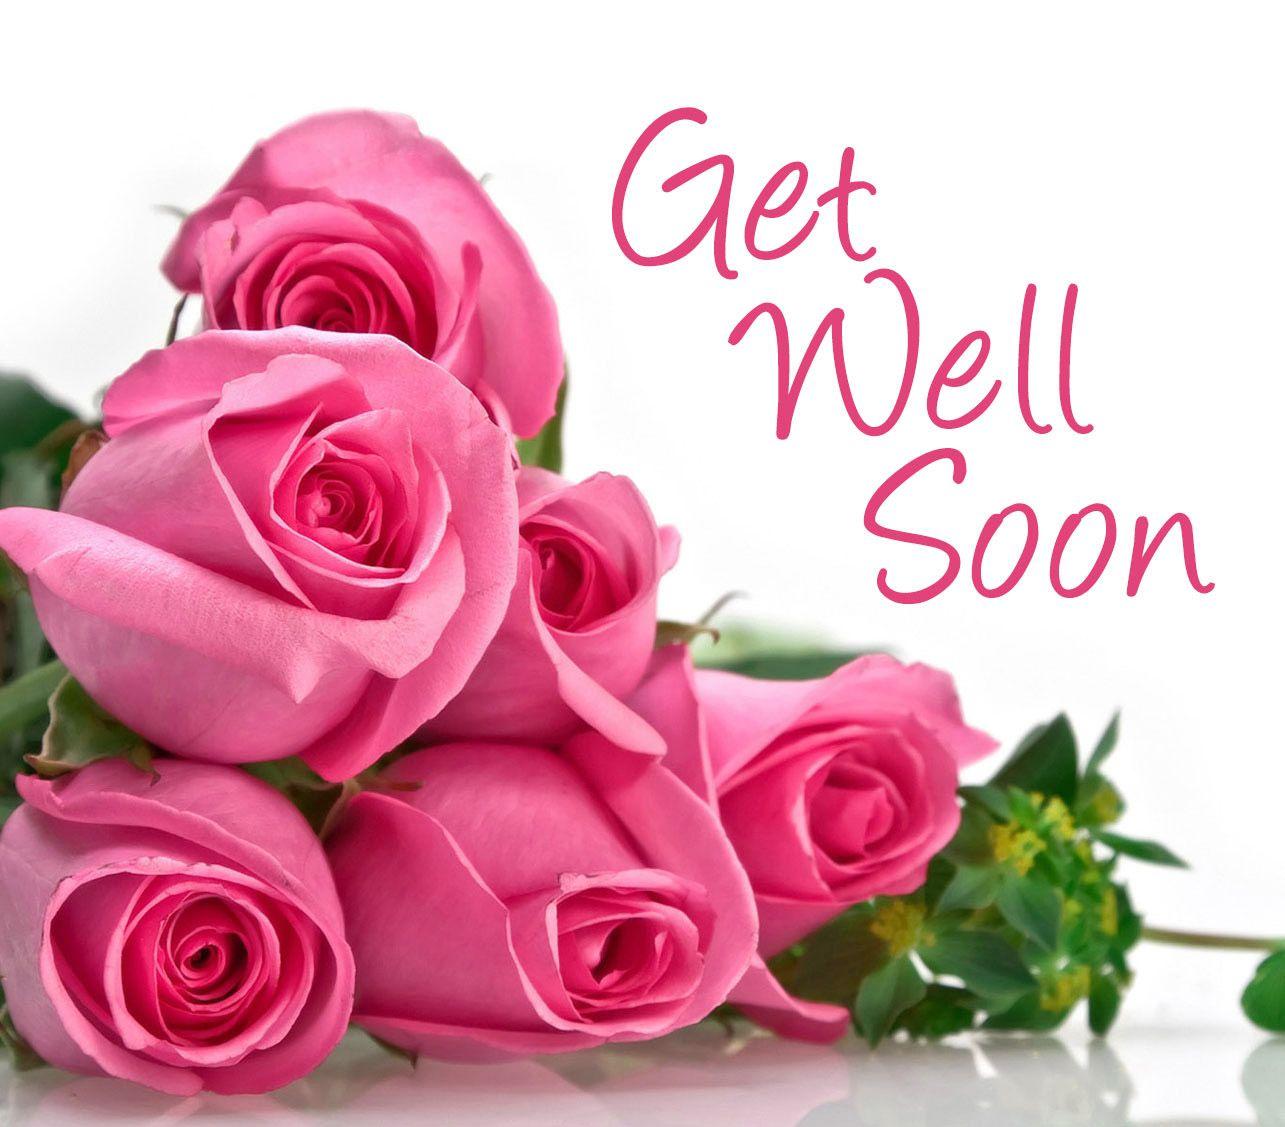 Get Well Soon Photos Free